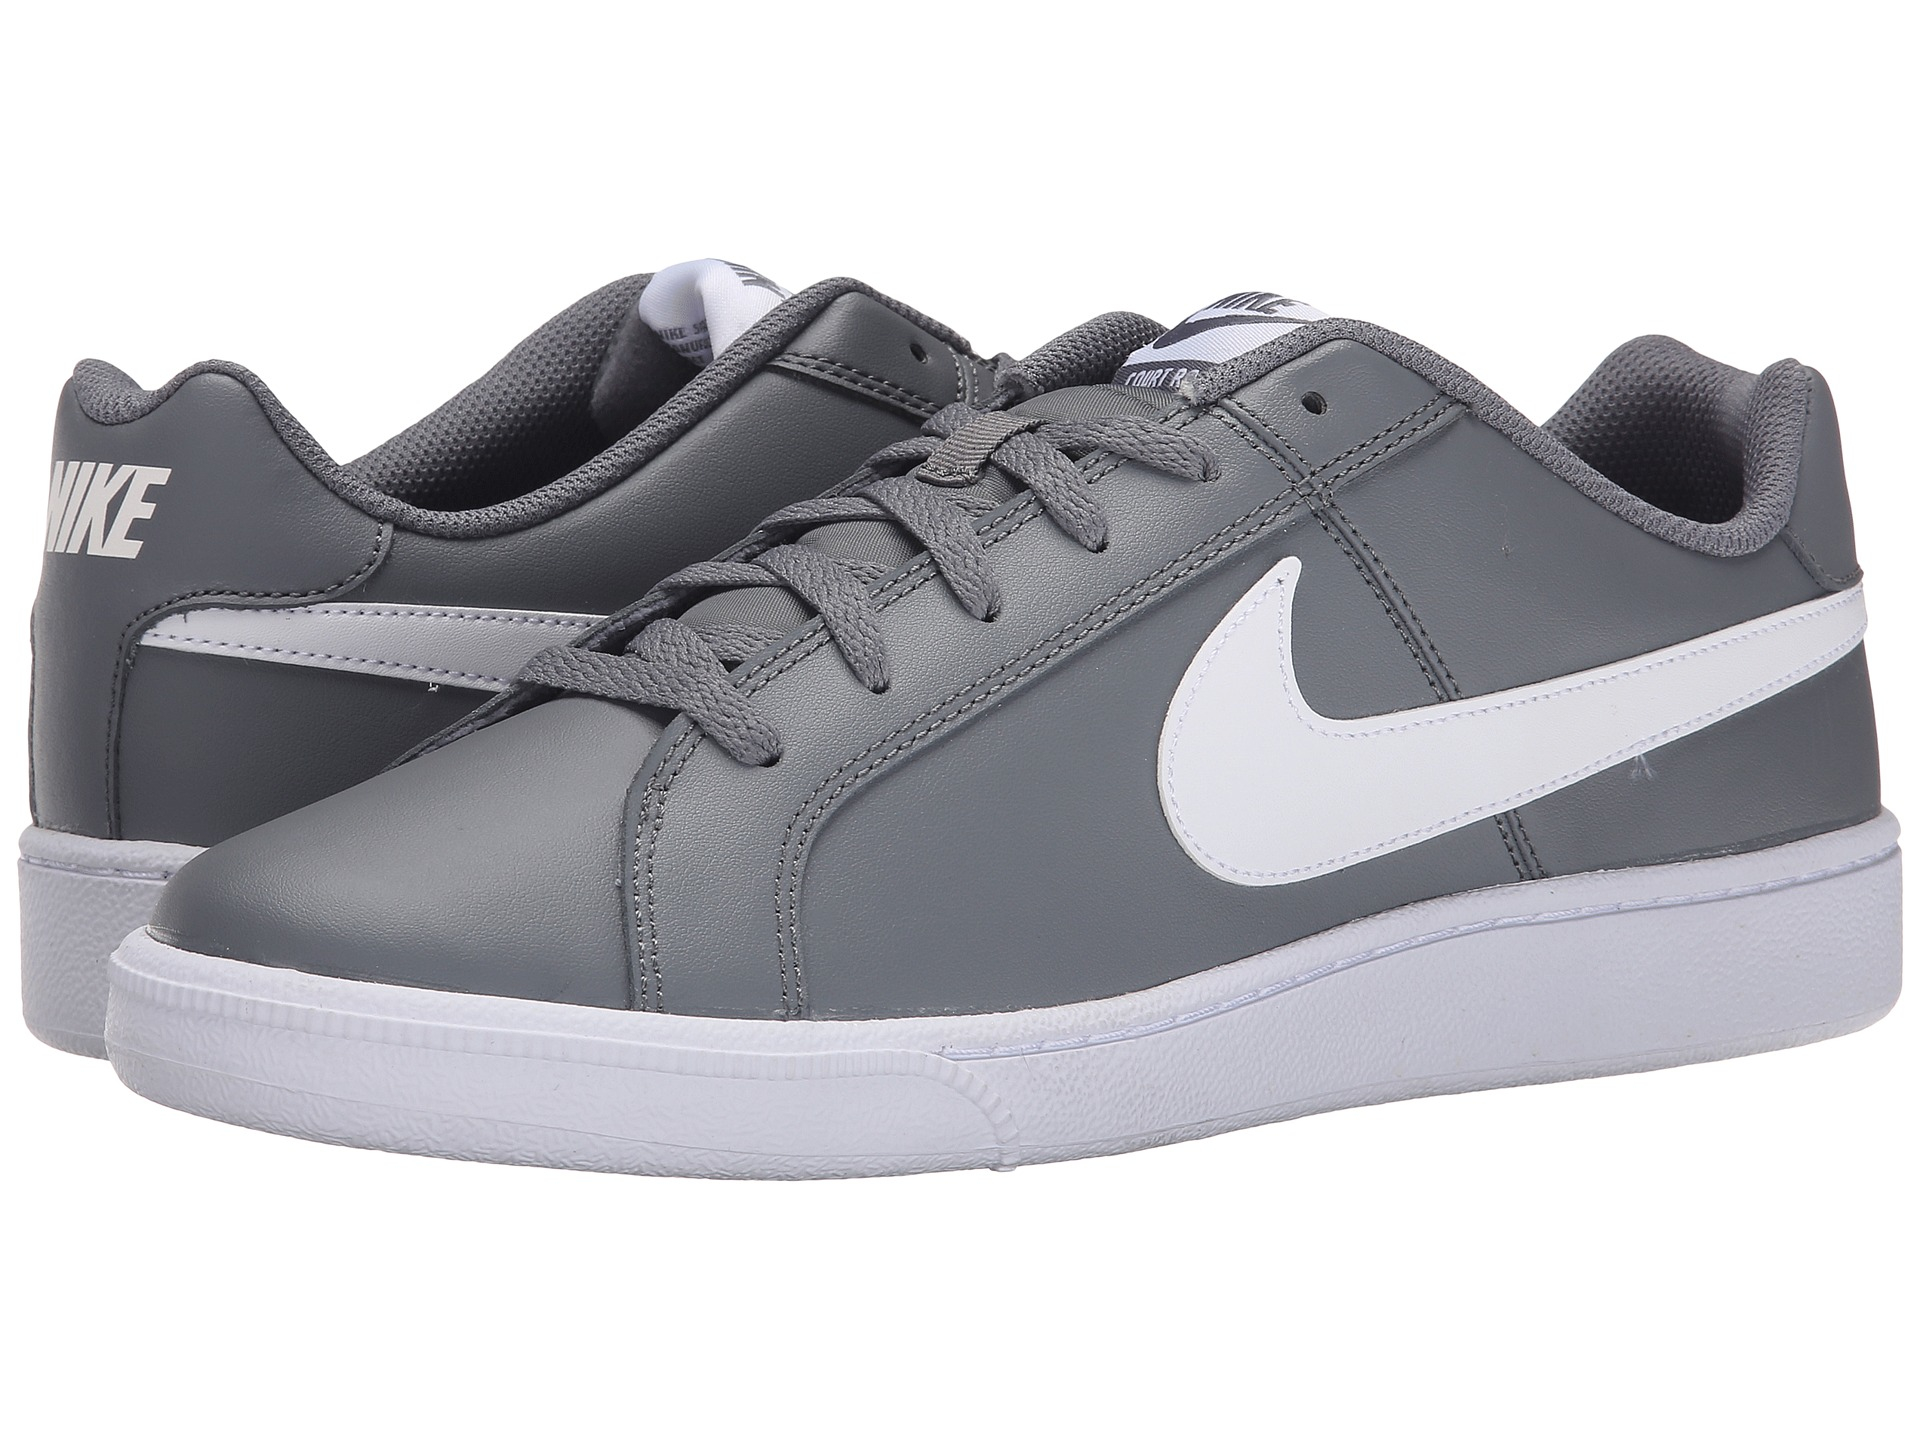 Nike Court Royale in Cool Grey/White 